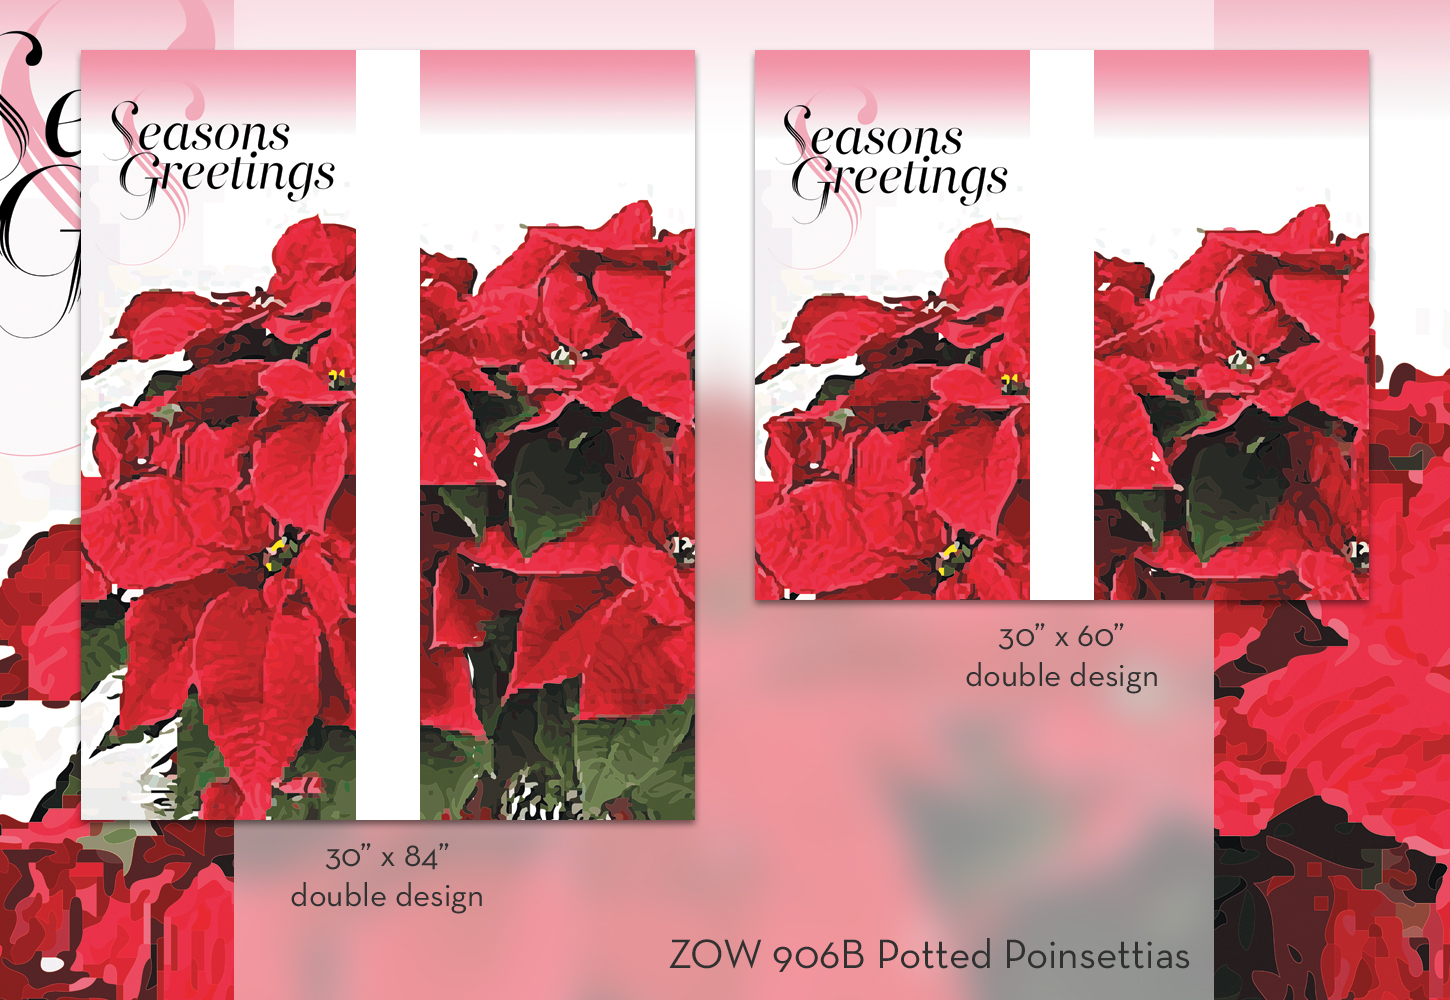 ZOW 906B Potted Poinsettias